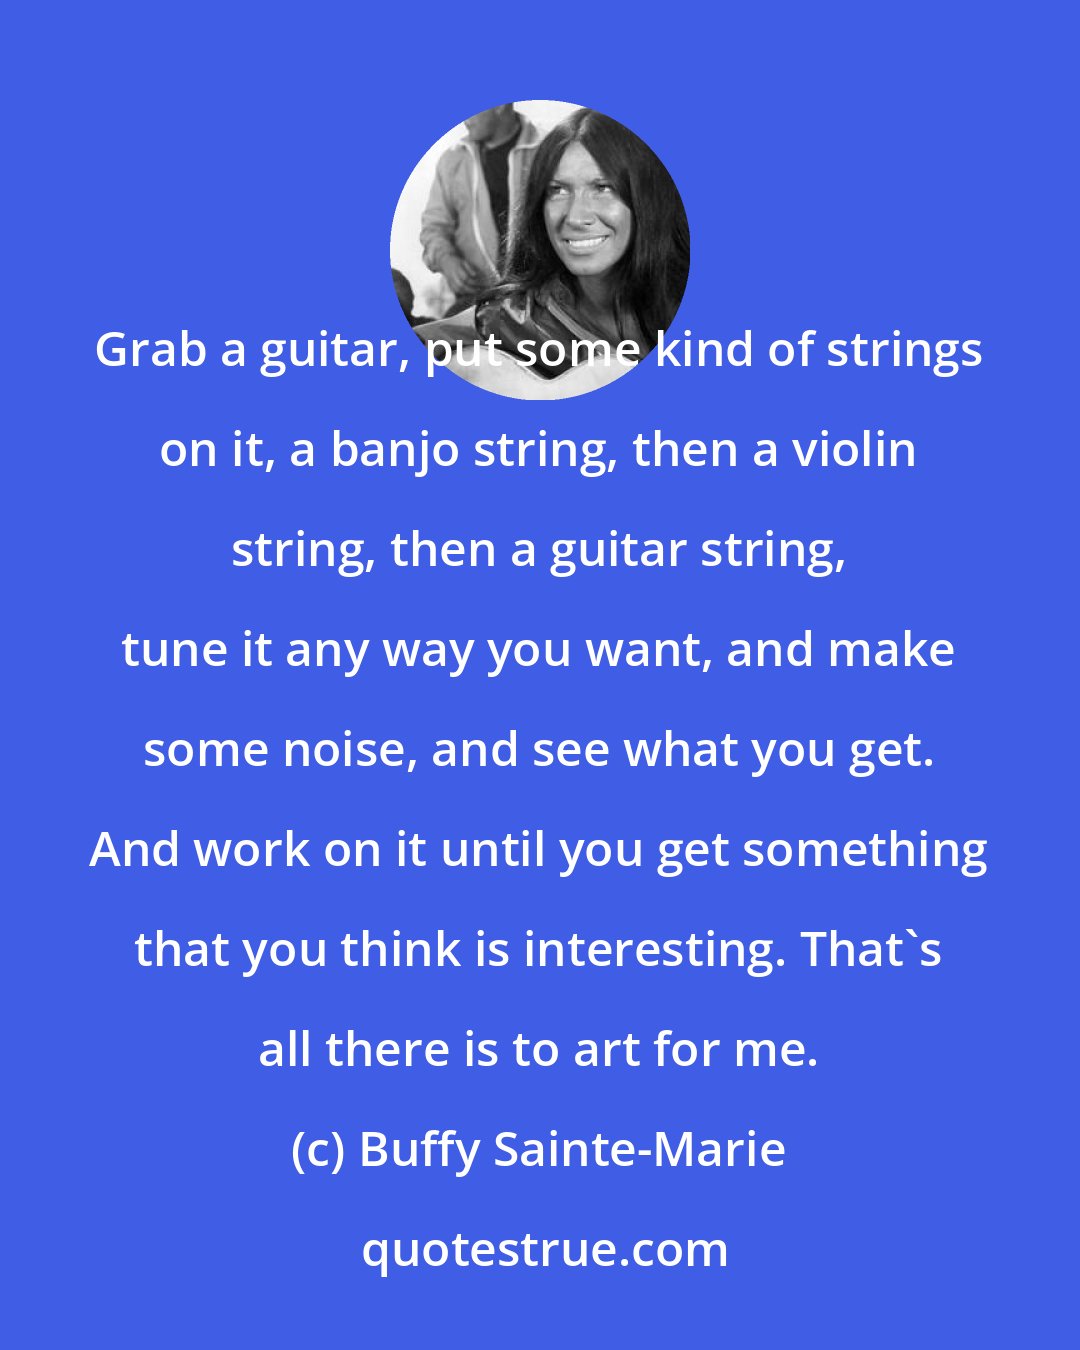 Buffy Sainte-Marie: Grab a guitar, put some kind of strings on it, a banjo string, then a violin string, then a guitar string, tune it any way you want, and make some noise, and see what you get. And work on it until you get something that you think is interesting. That's all there is to art for me.